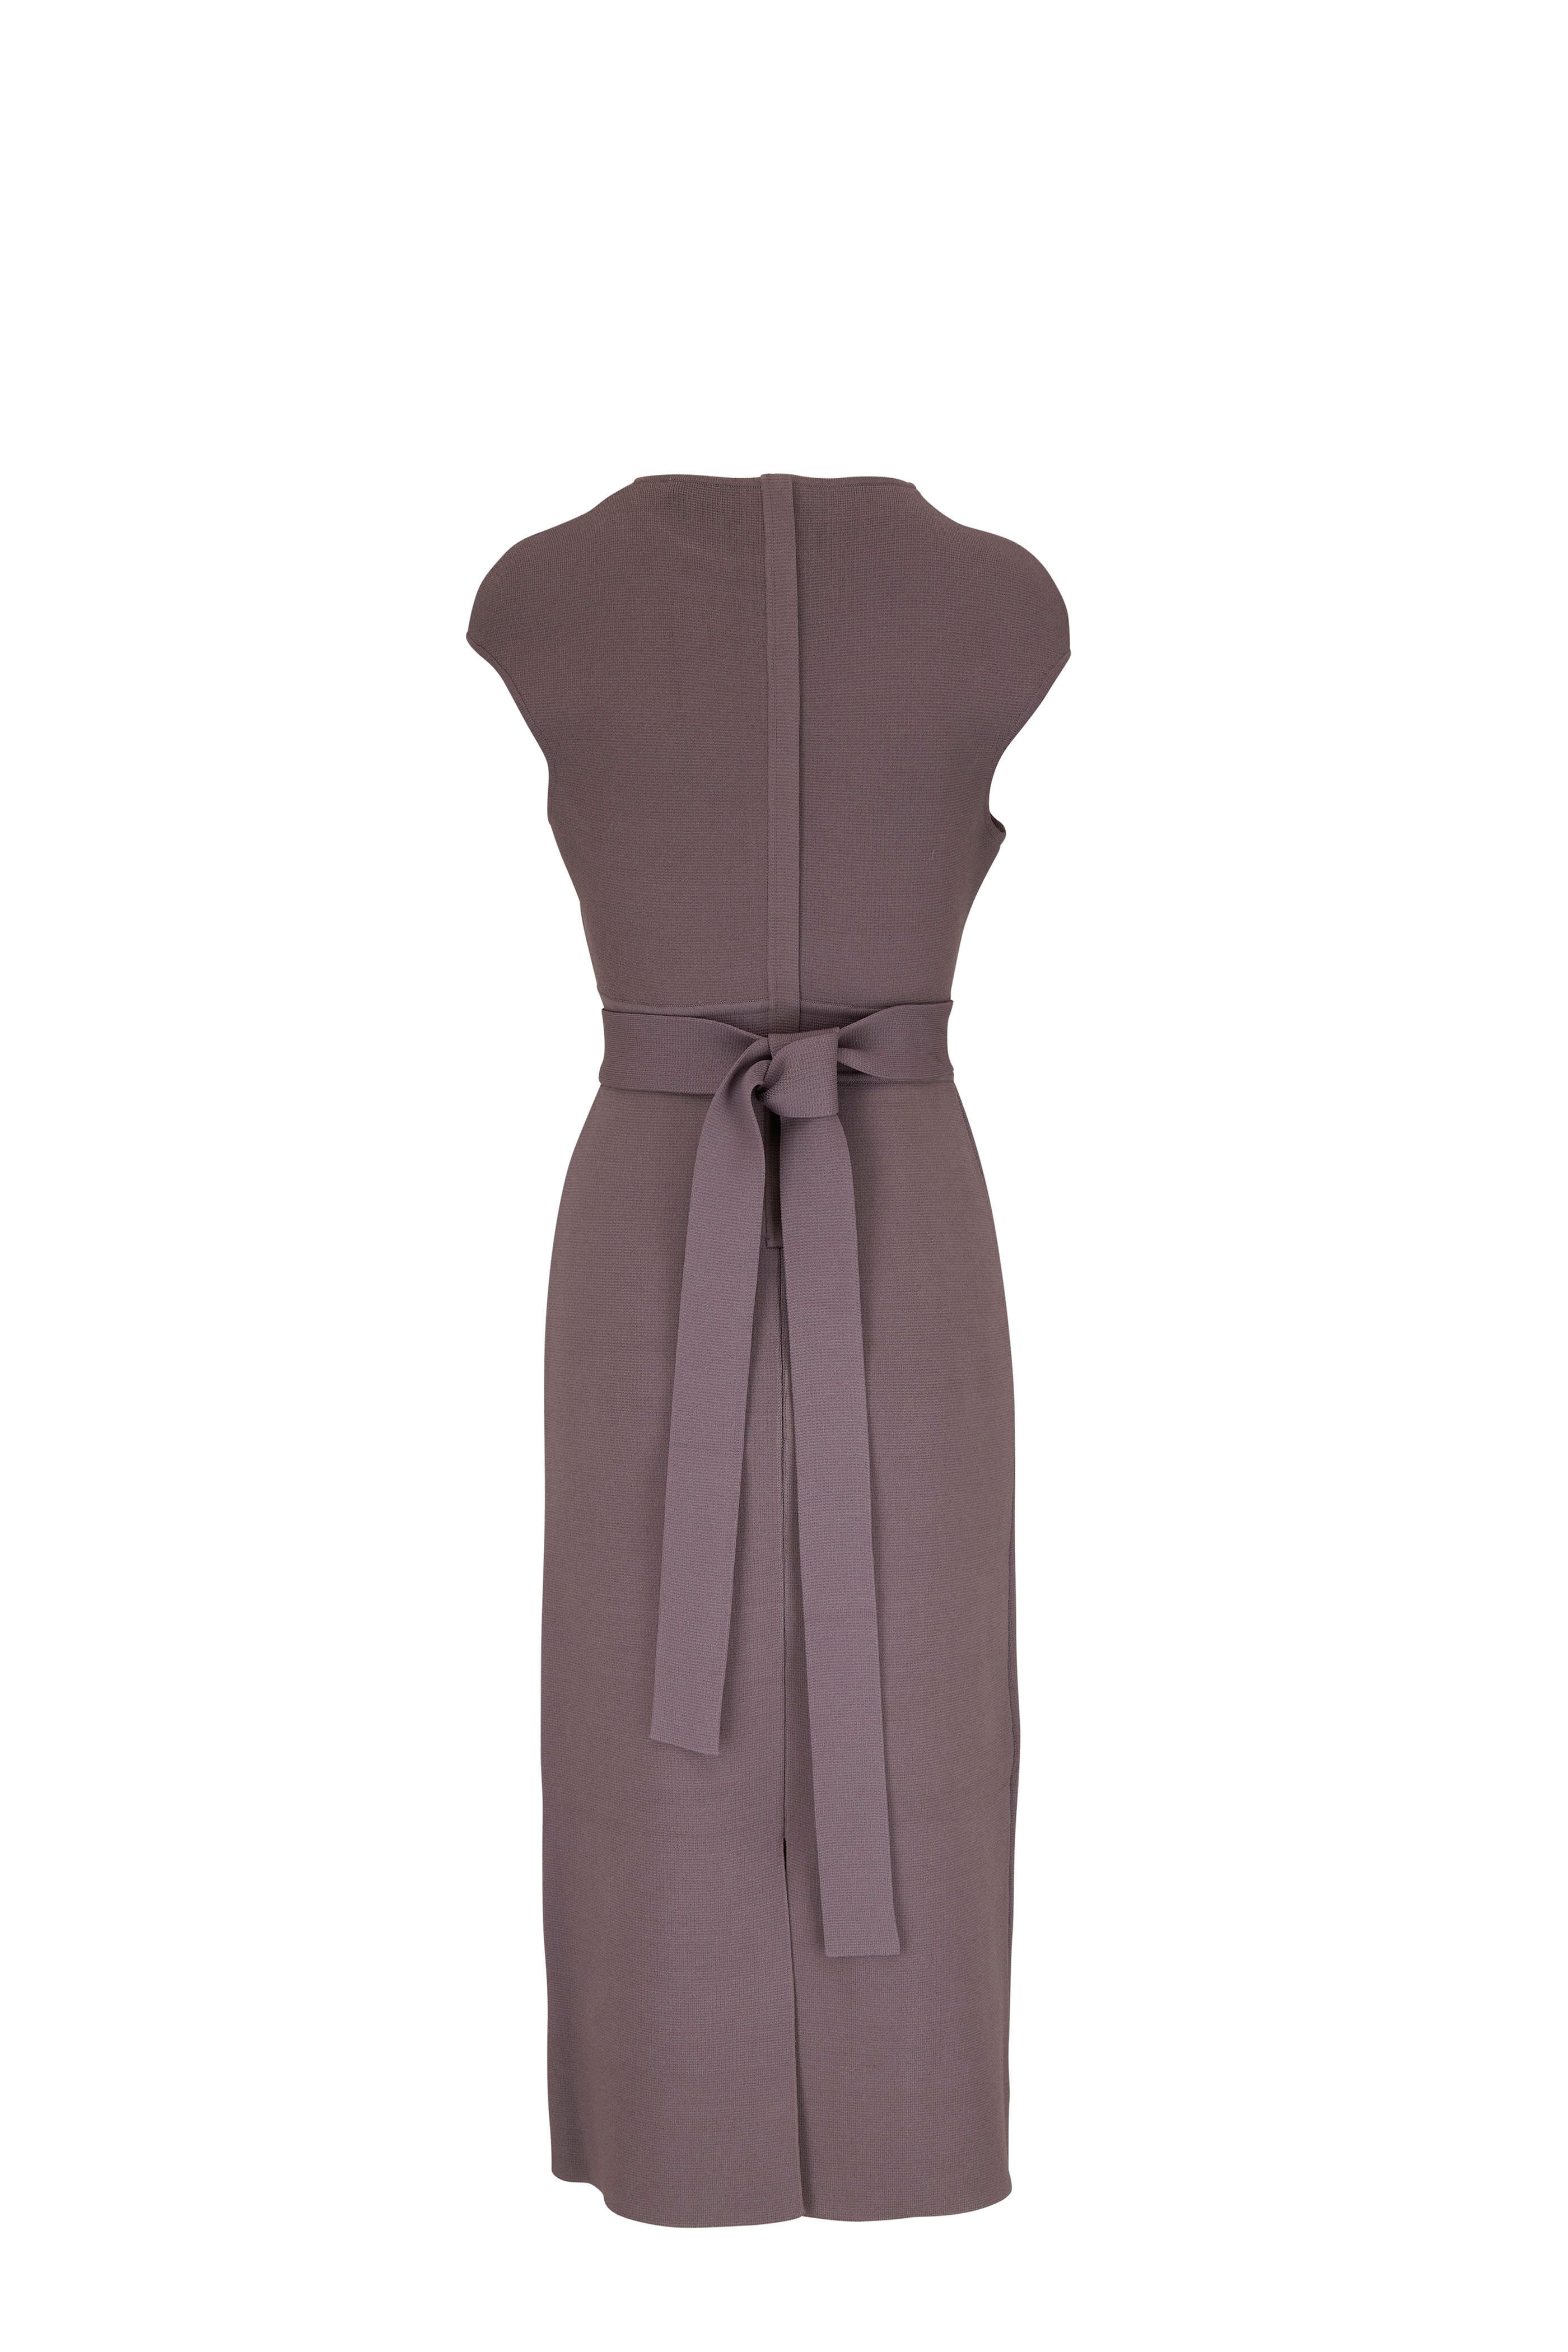 Scanlan Theodore - Taupe Crepe Knit Midi Dress | Mitchell Stores